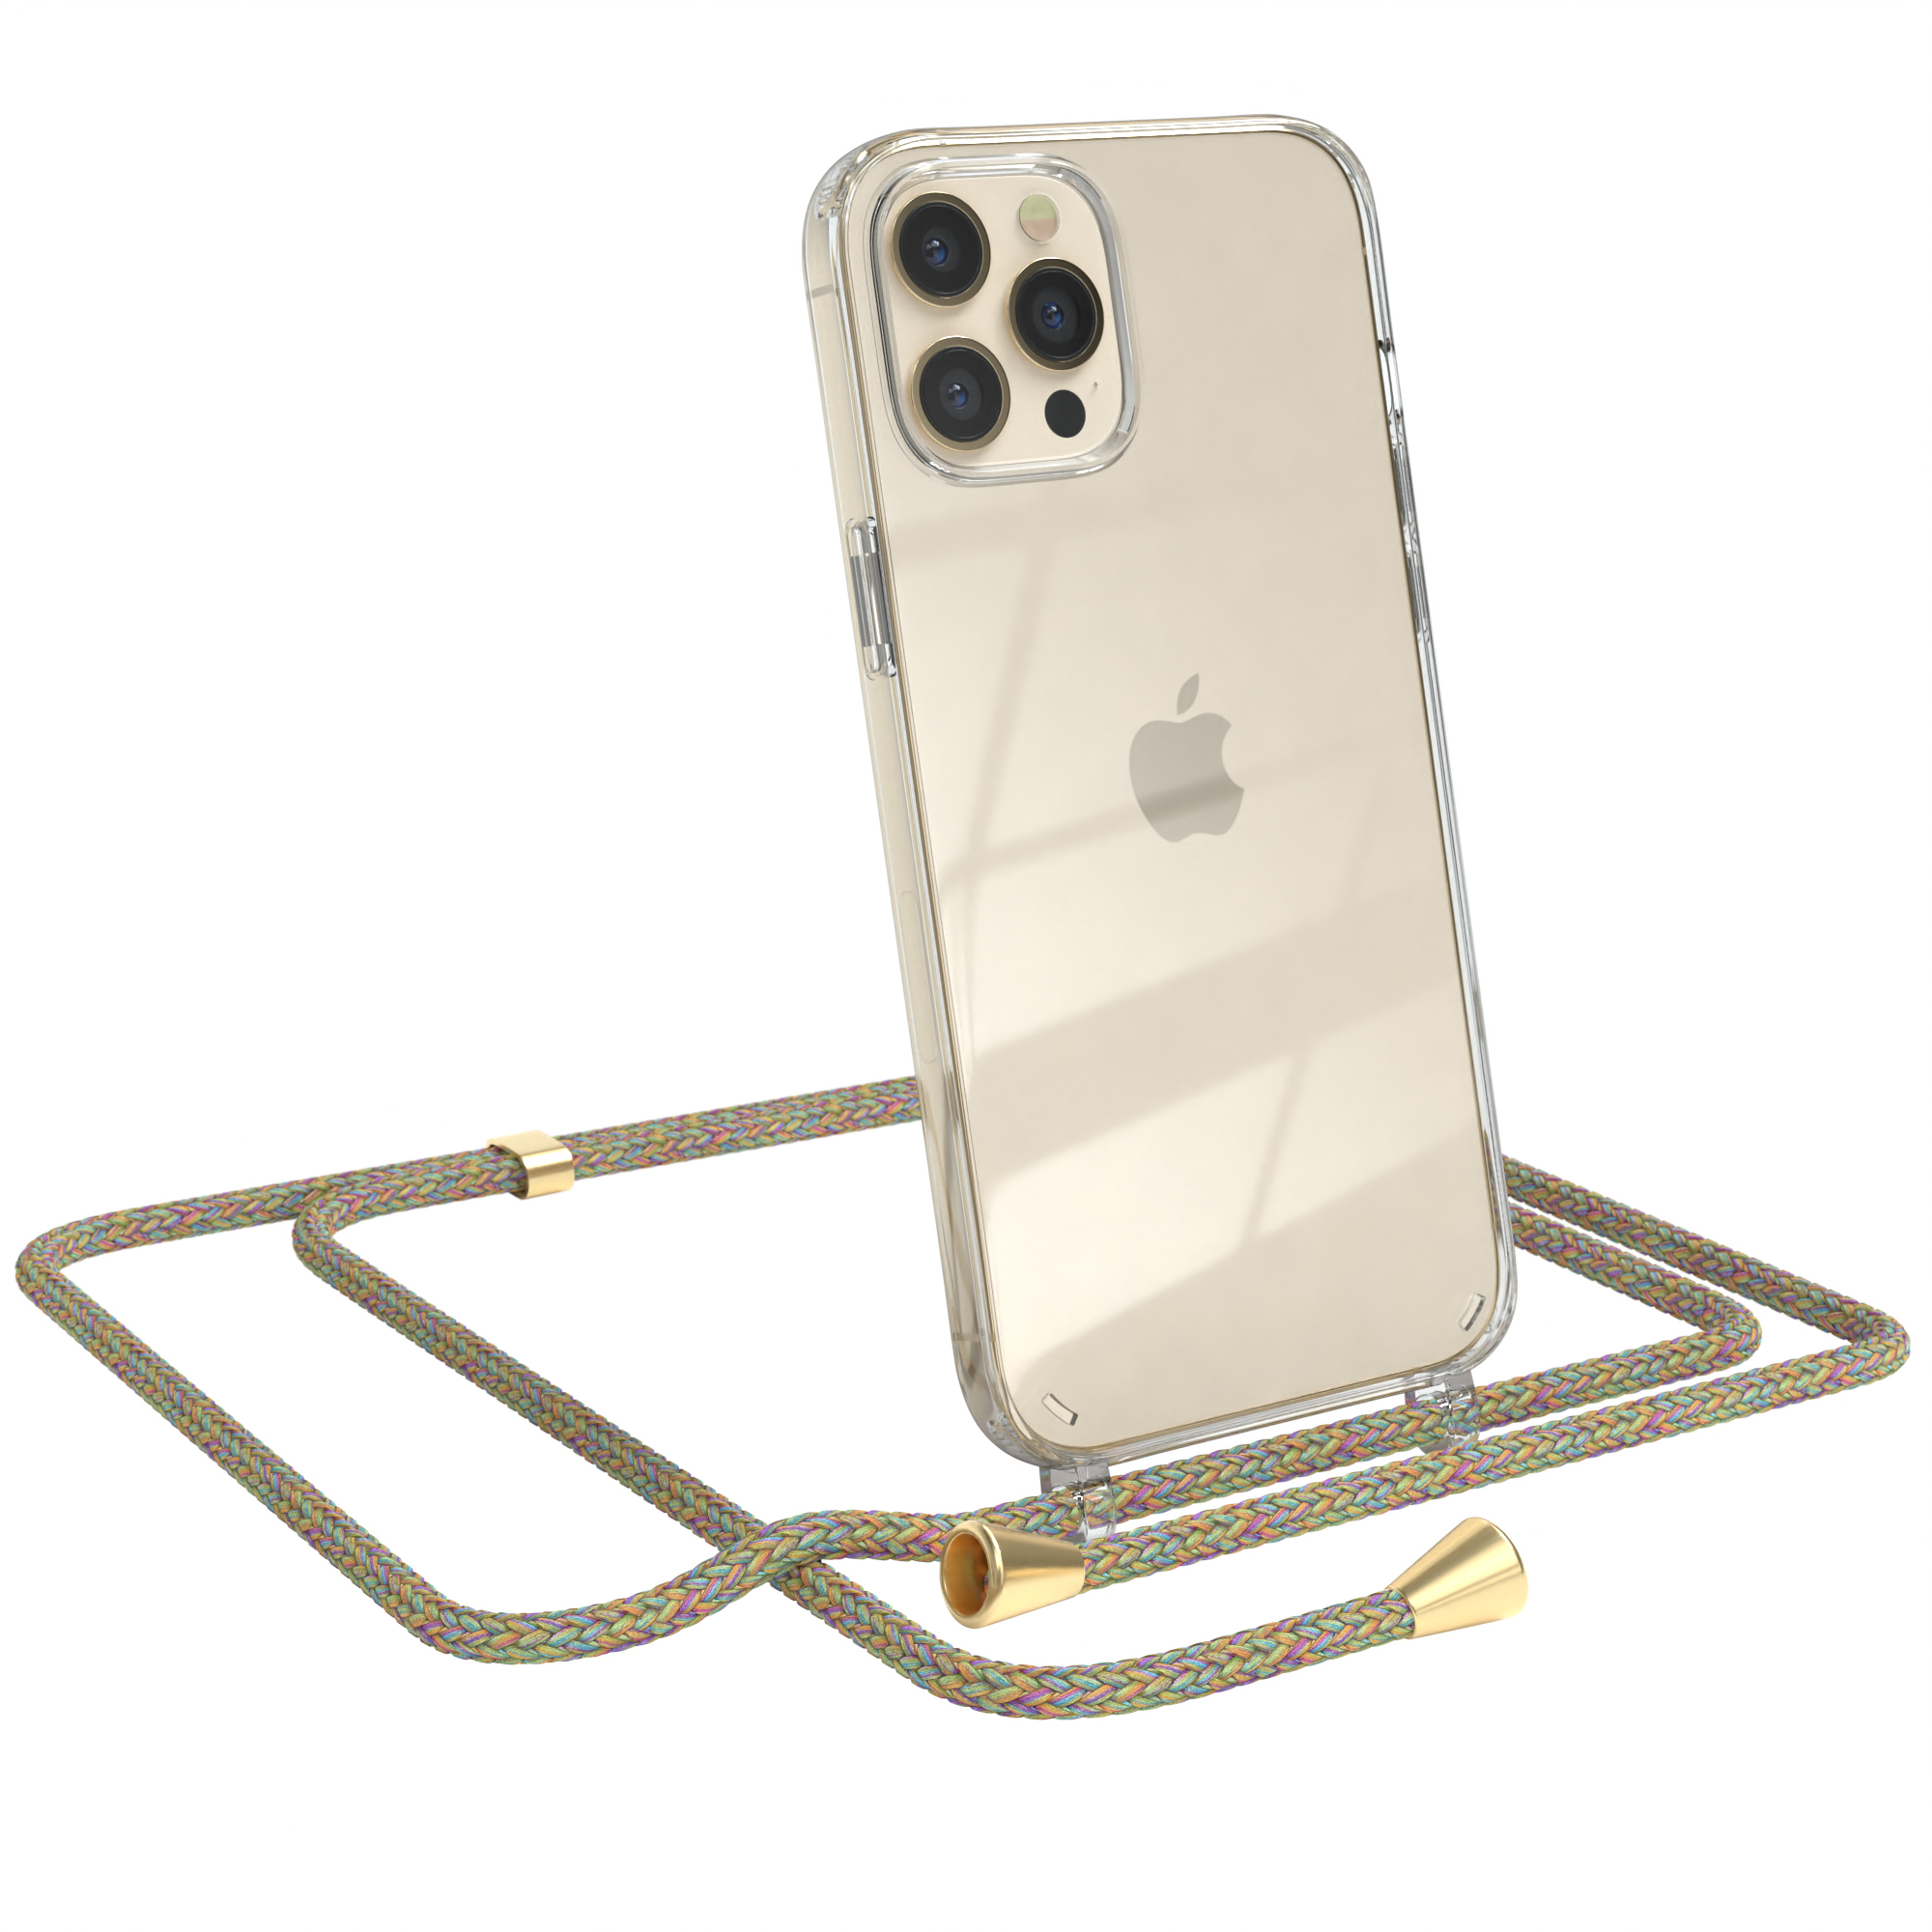 mit Apple, Cover iPhone Max, EAZY / Pro Gold Bunt Clips Clear CASE Umhängetasche, Umhängeband, 12